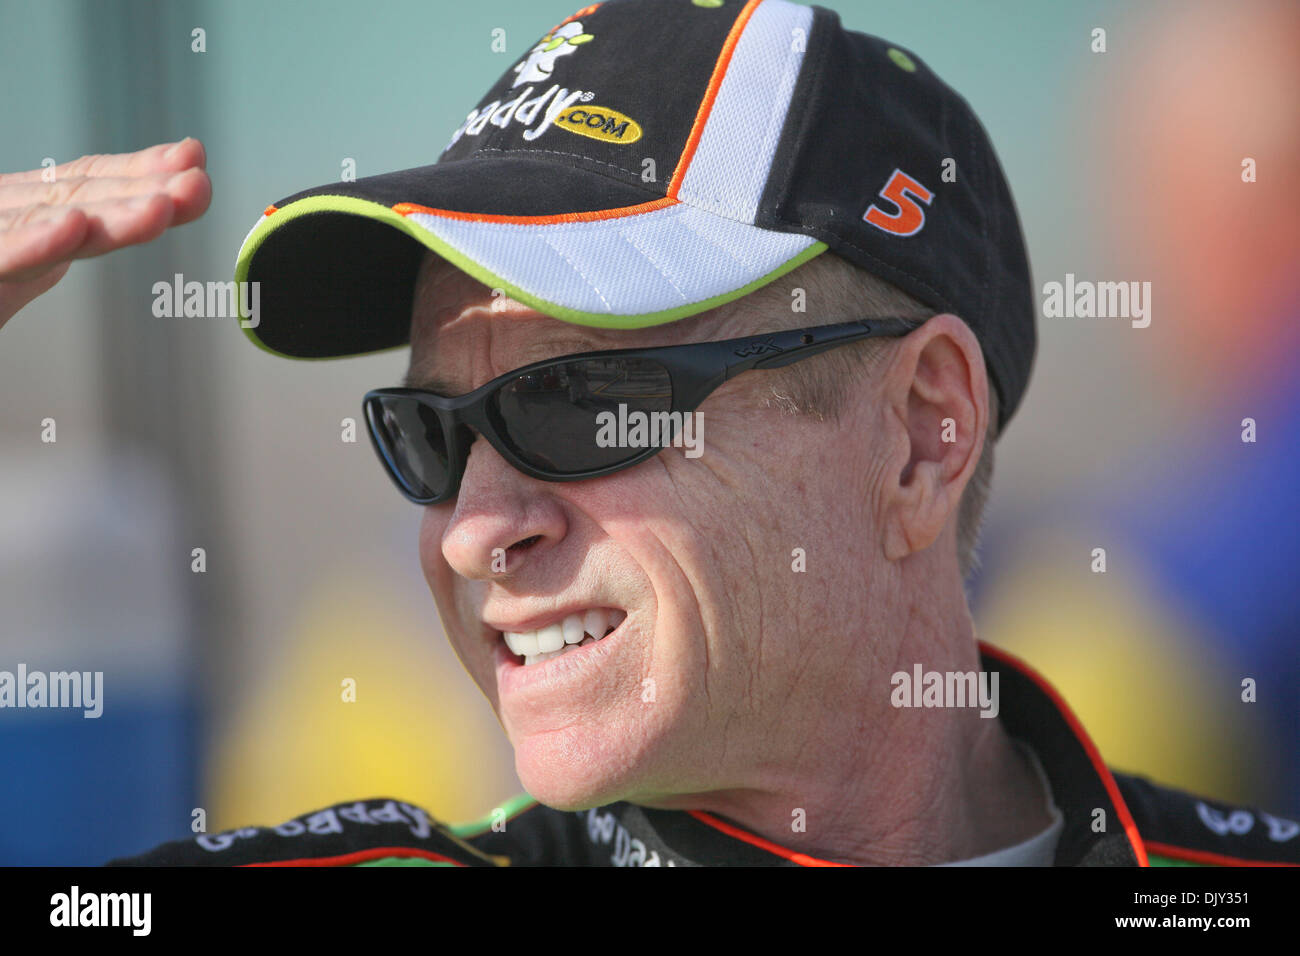 Nov. 19, 2010 - Homestead, Florida, United States of America - Mark Martin eyeing his young competition while getting ready to qualify for the NASCAR Sprint Cup Series Ford 400 at Homestead Miami Speedway in Homestead, Florida. (Credit Image: © Ben Hicks/Southcreek Global/ZUMAPRESS.com) Stock Photo